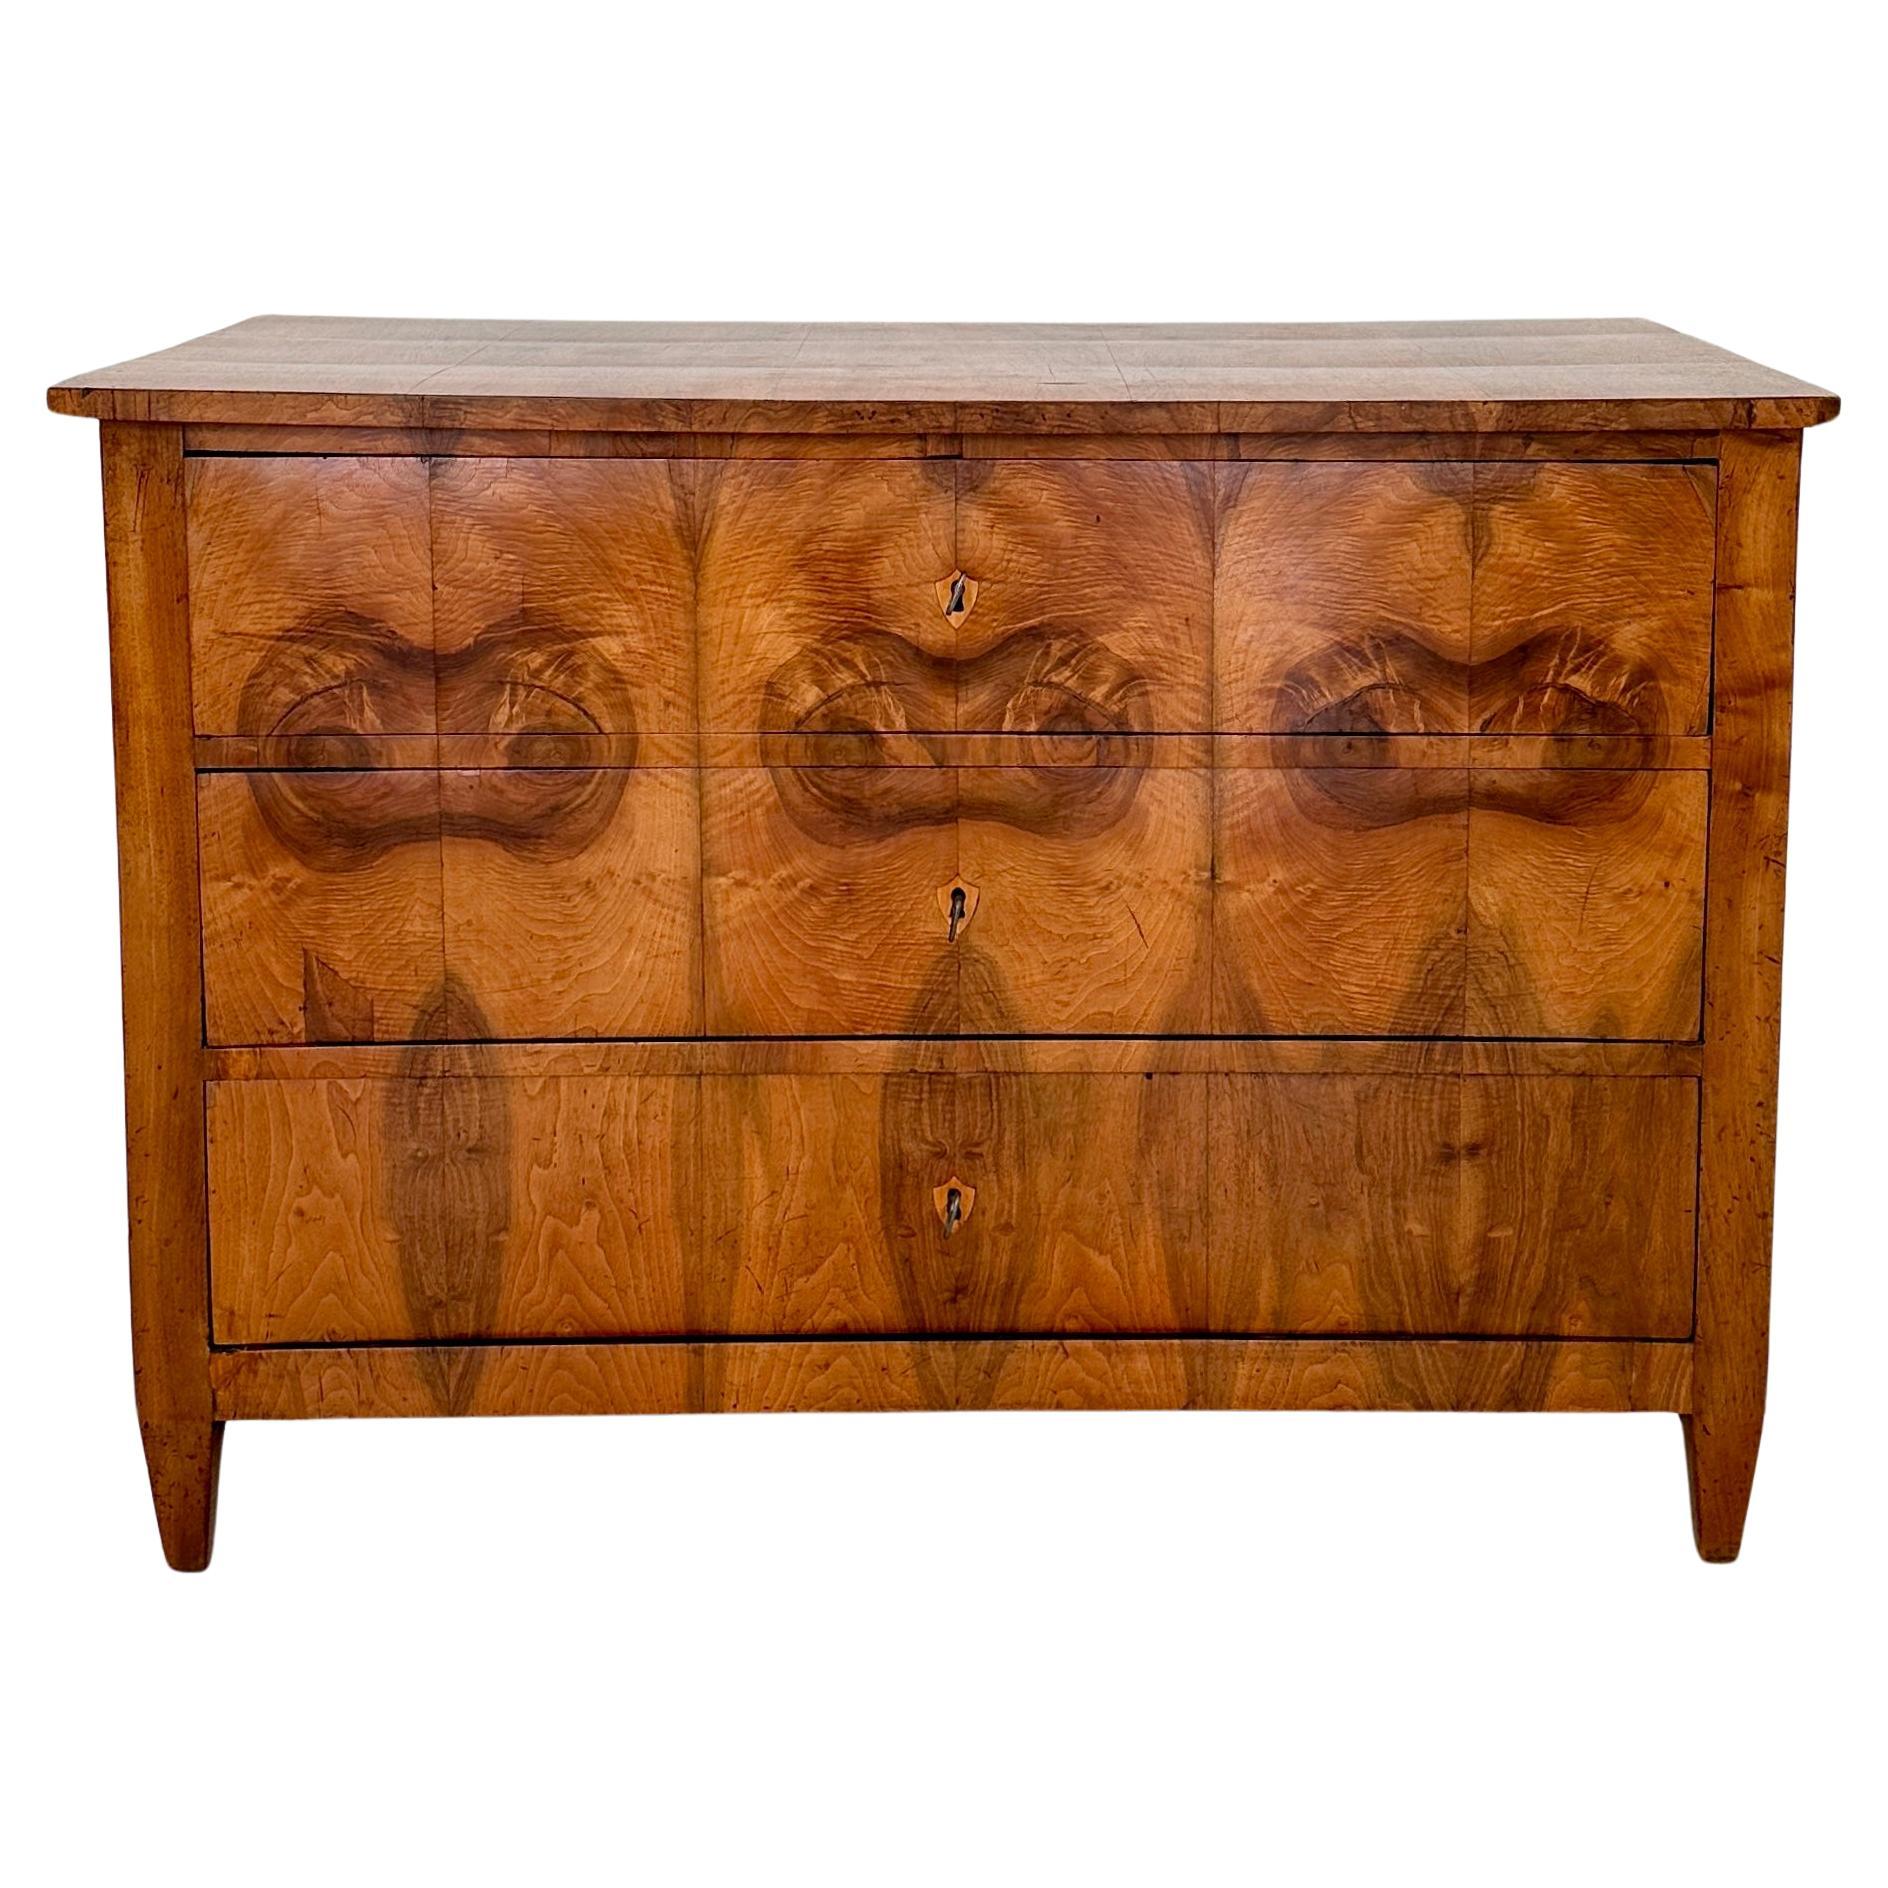 19th Century German Biedermeier Chest of Drawers in Walnut with 3 Drawers, 1820 For Sale